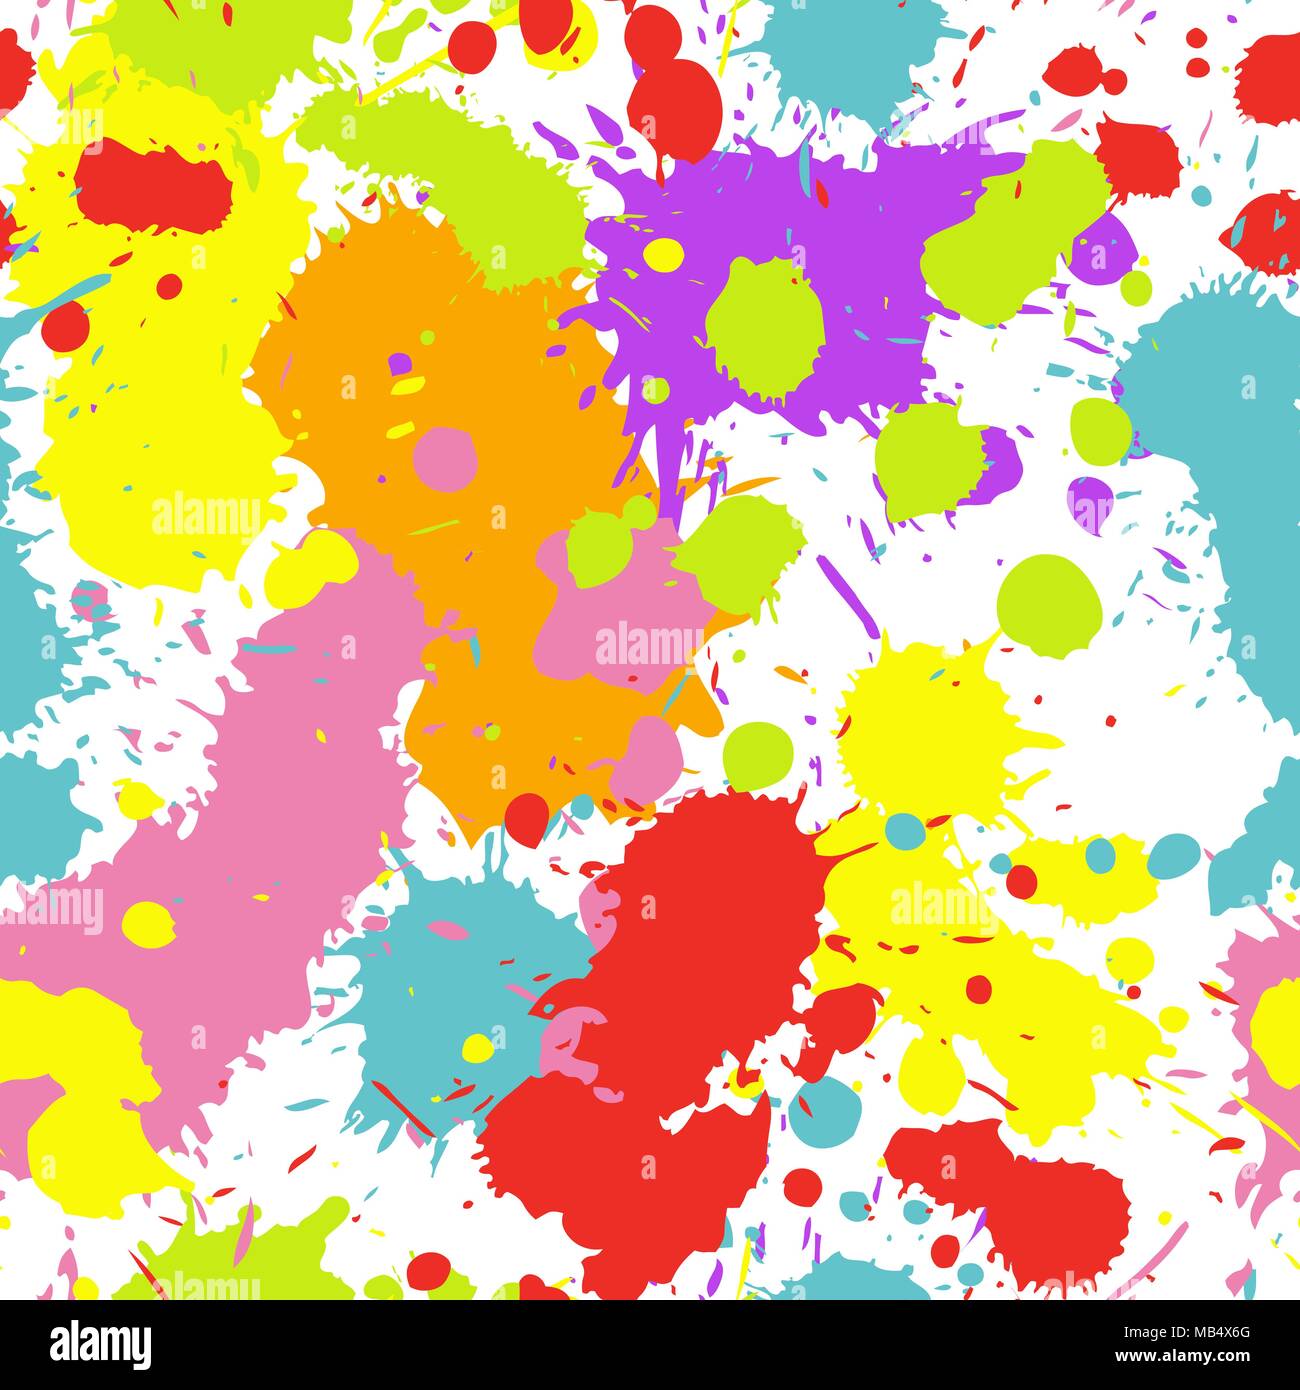 A seamless pattern of colorful ink splatters spraying in all directions. Stock Vector